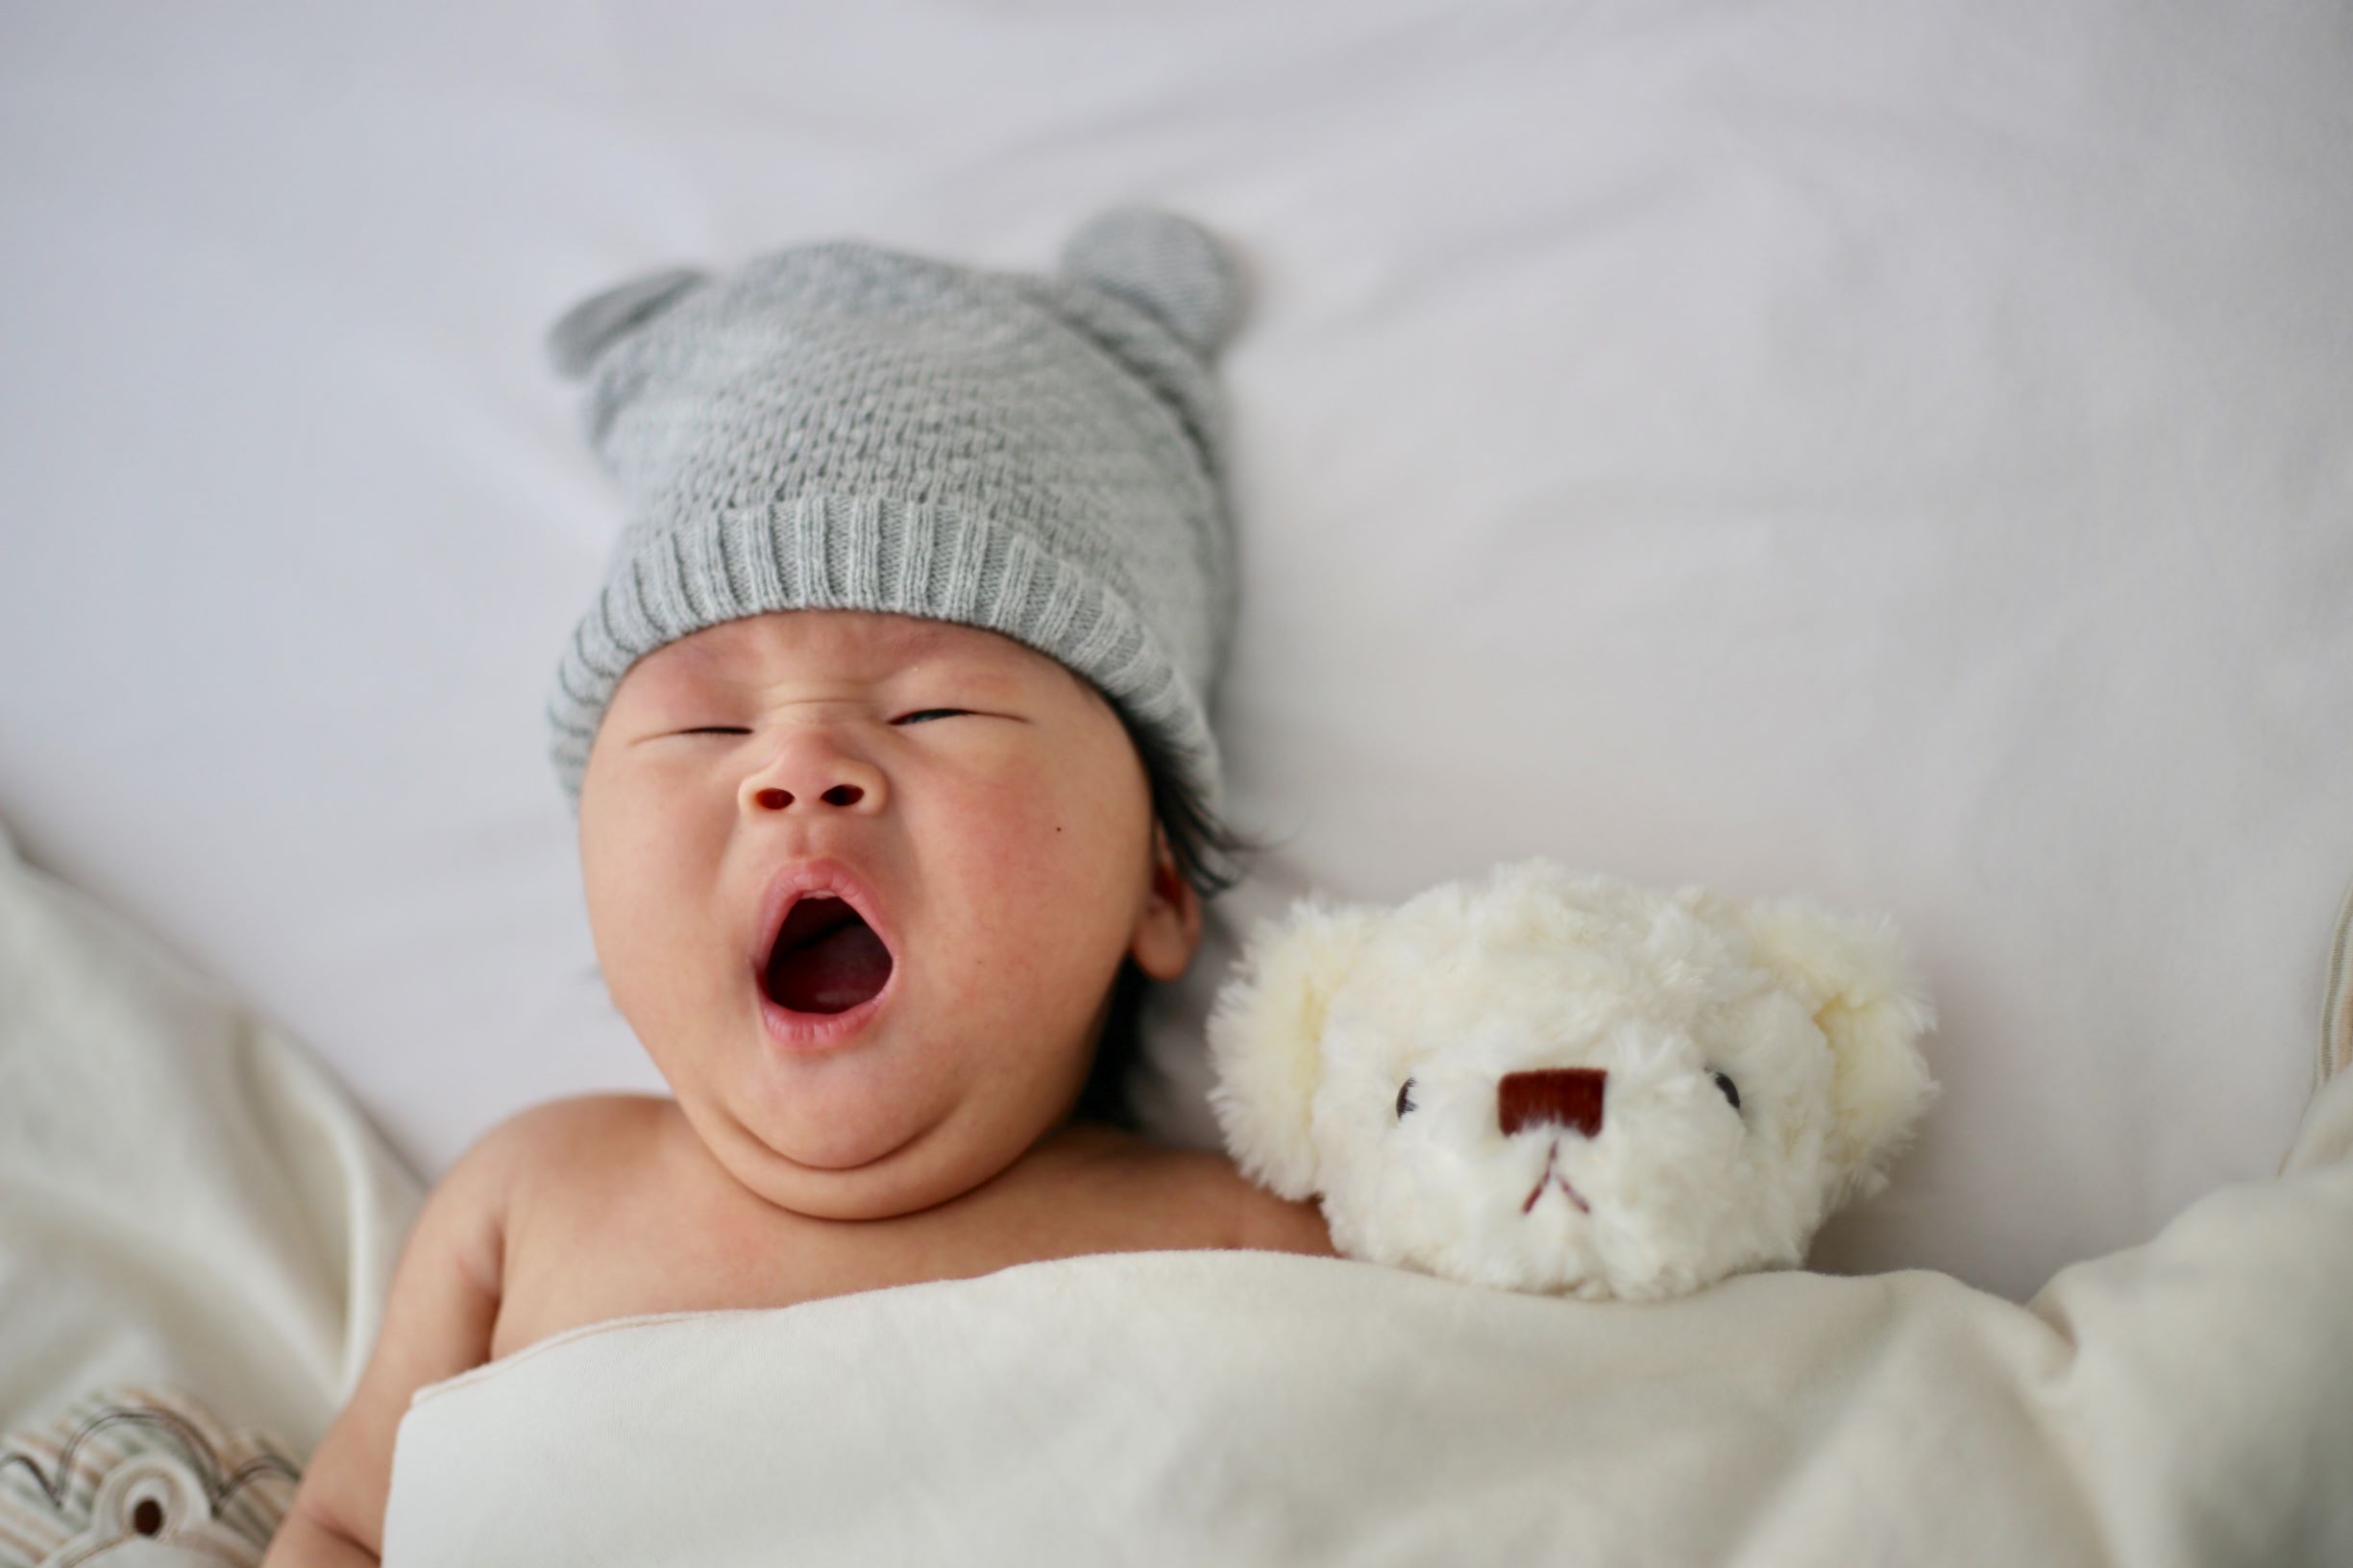 Newborn child tucked into a bed with a small white stuffed bear.